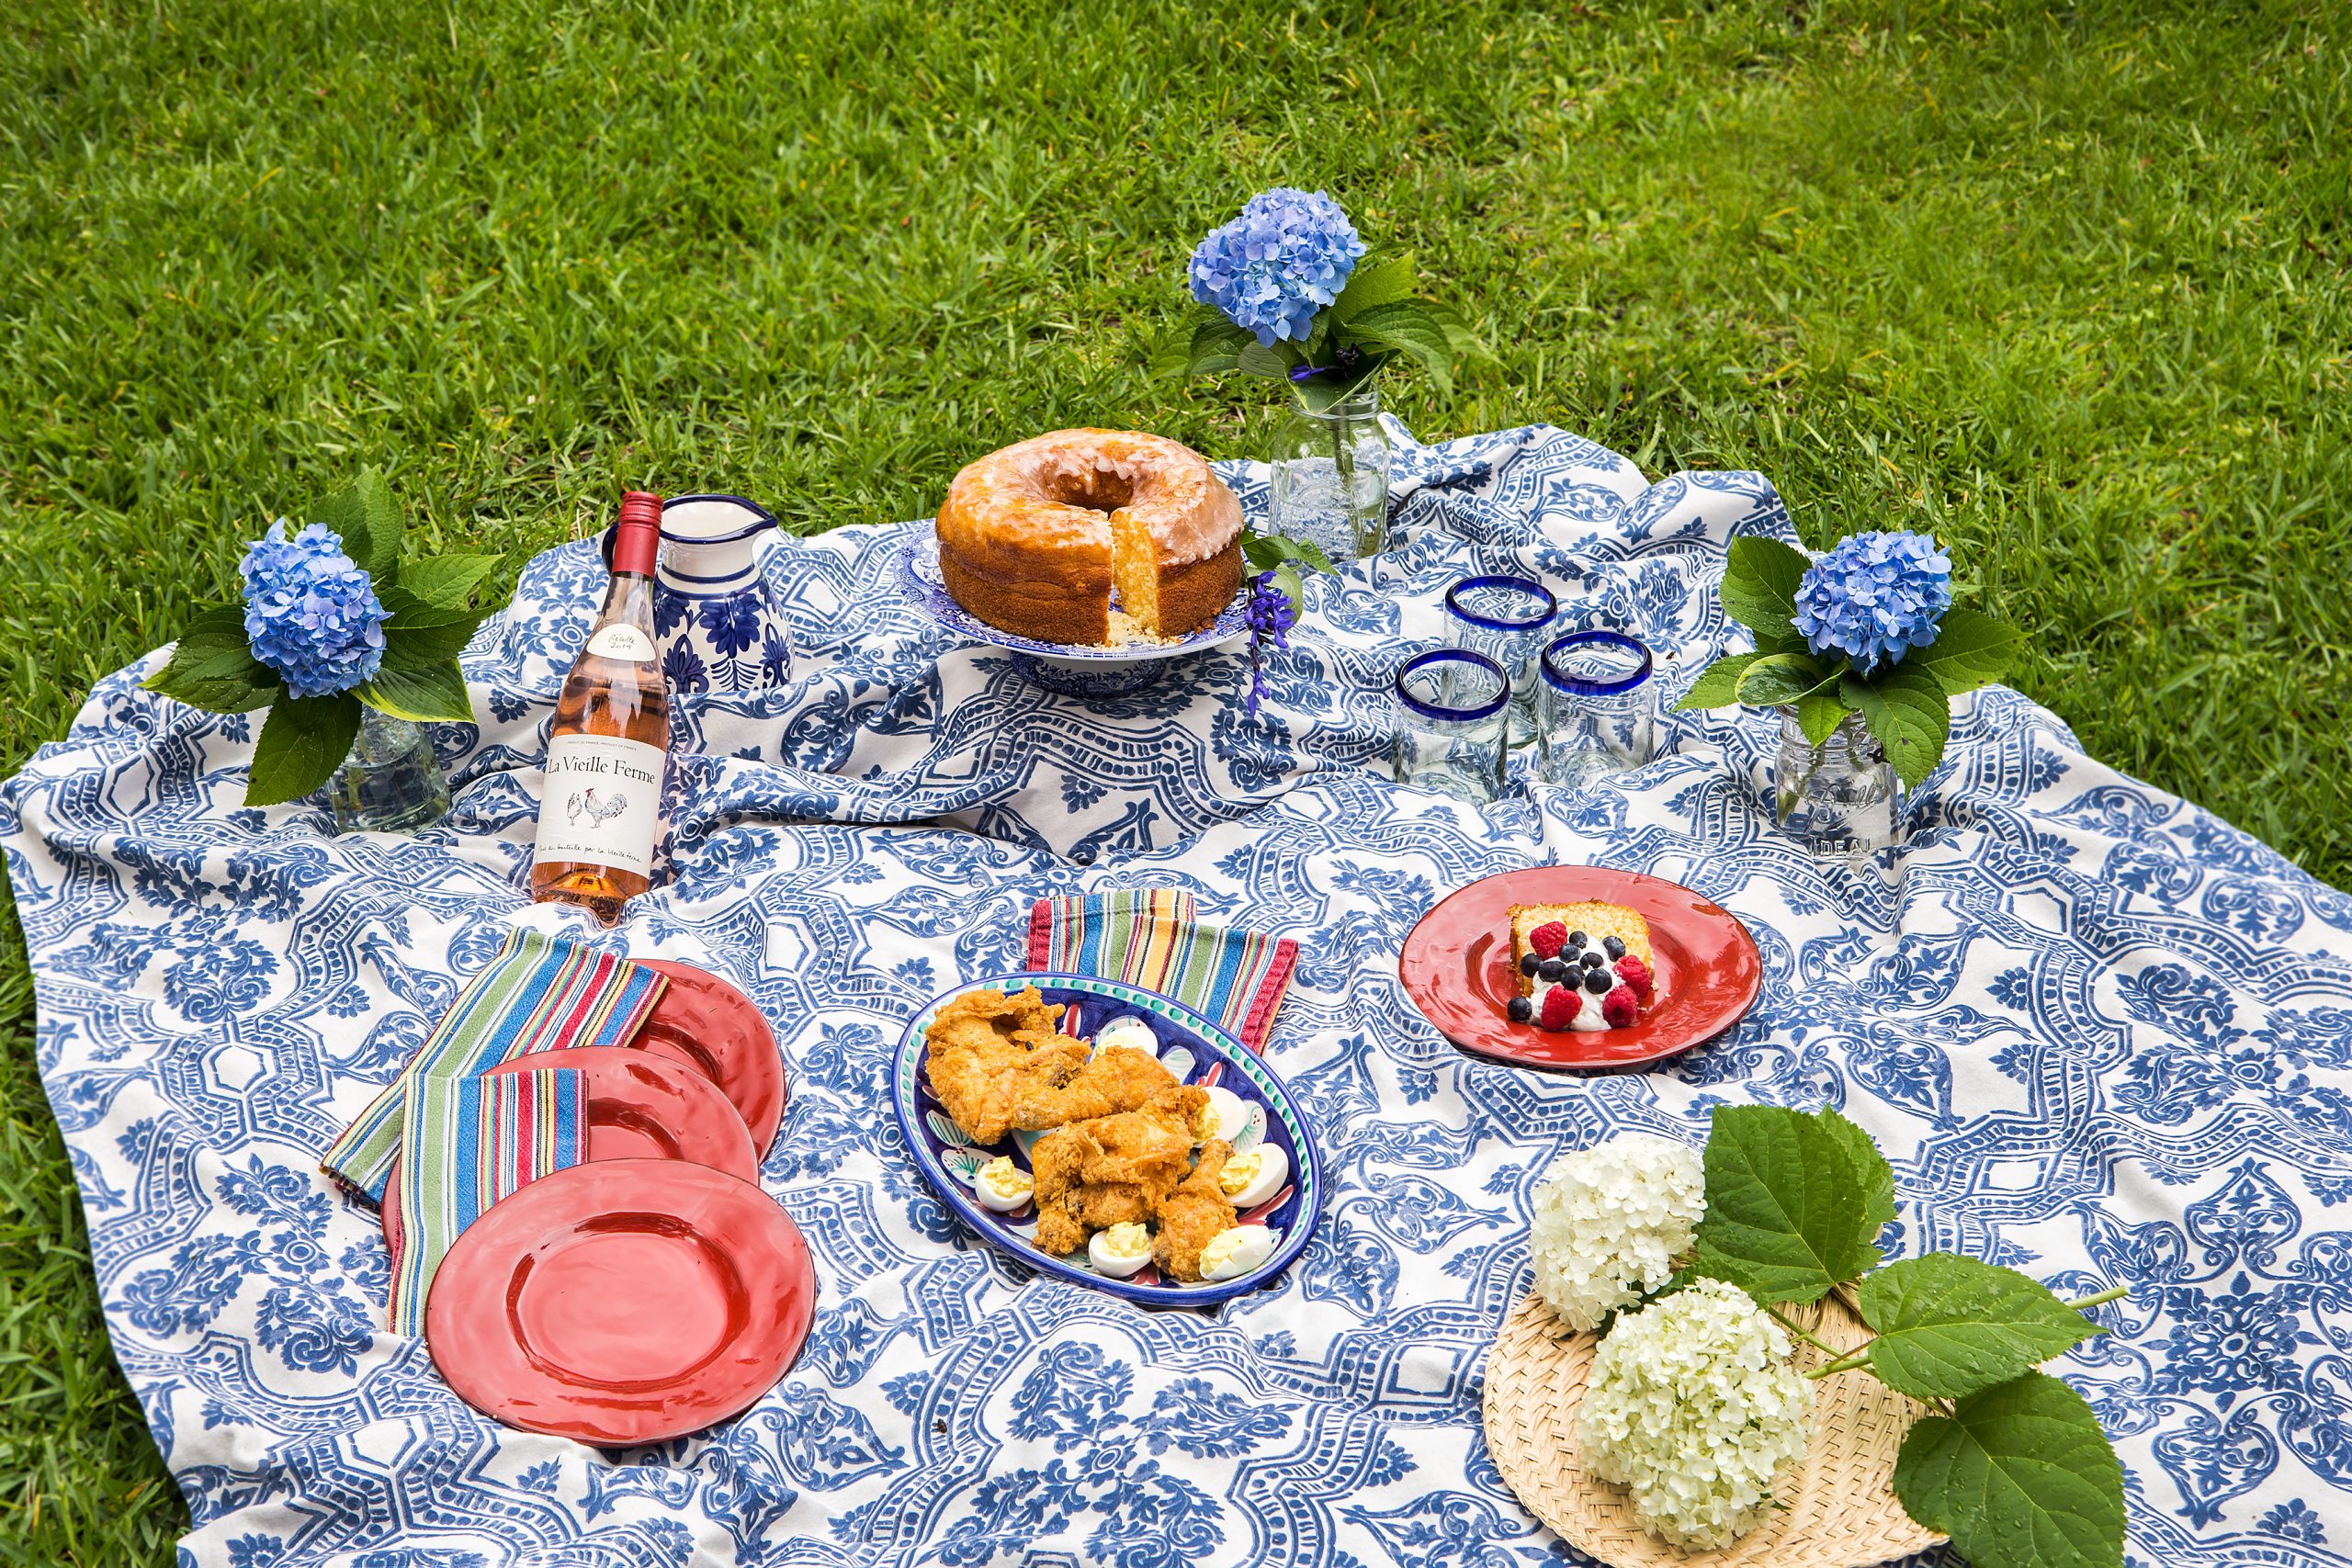 Celebrations like Labor Day, Memorial Day, or the Fourth of July are a wonderful time to plan a picnic. Make your picnic easy with store-bought fried chicken and cold salads. Enjoy a comfortable spot in the cool grass and make a memory.  